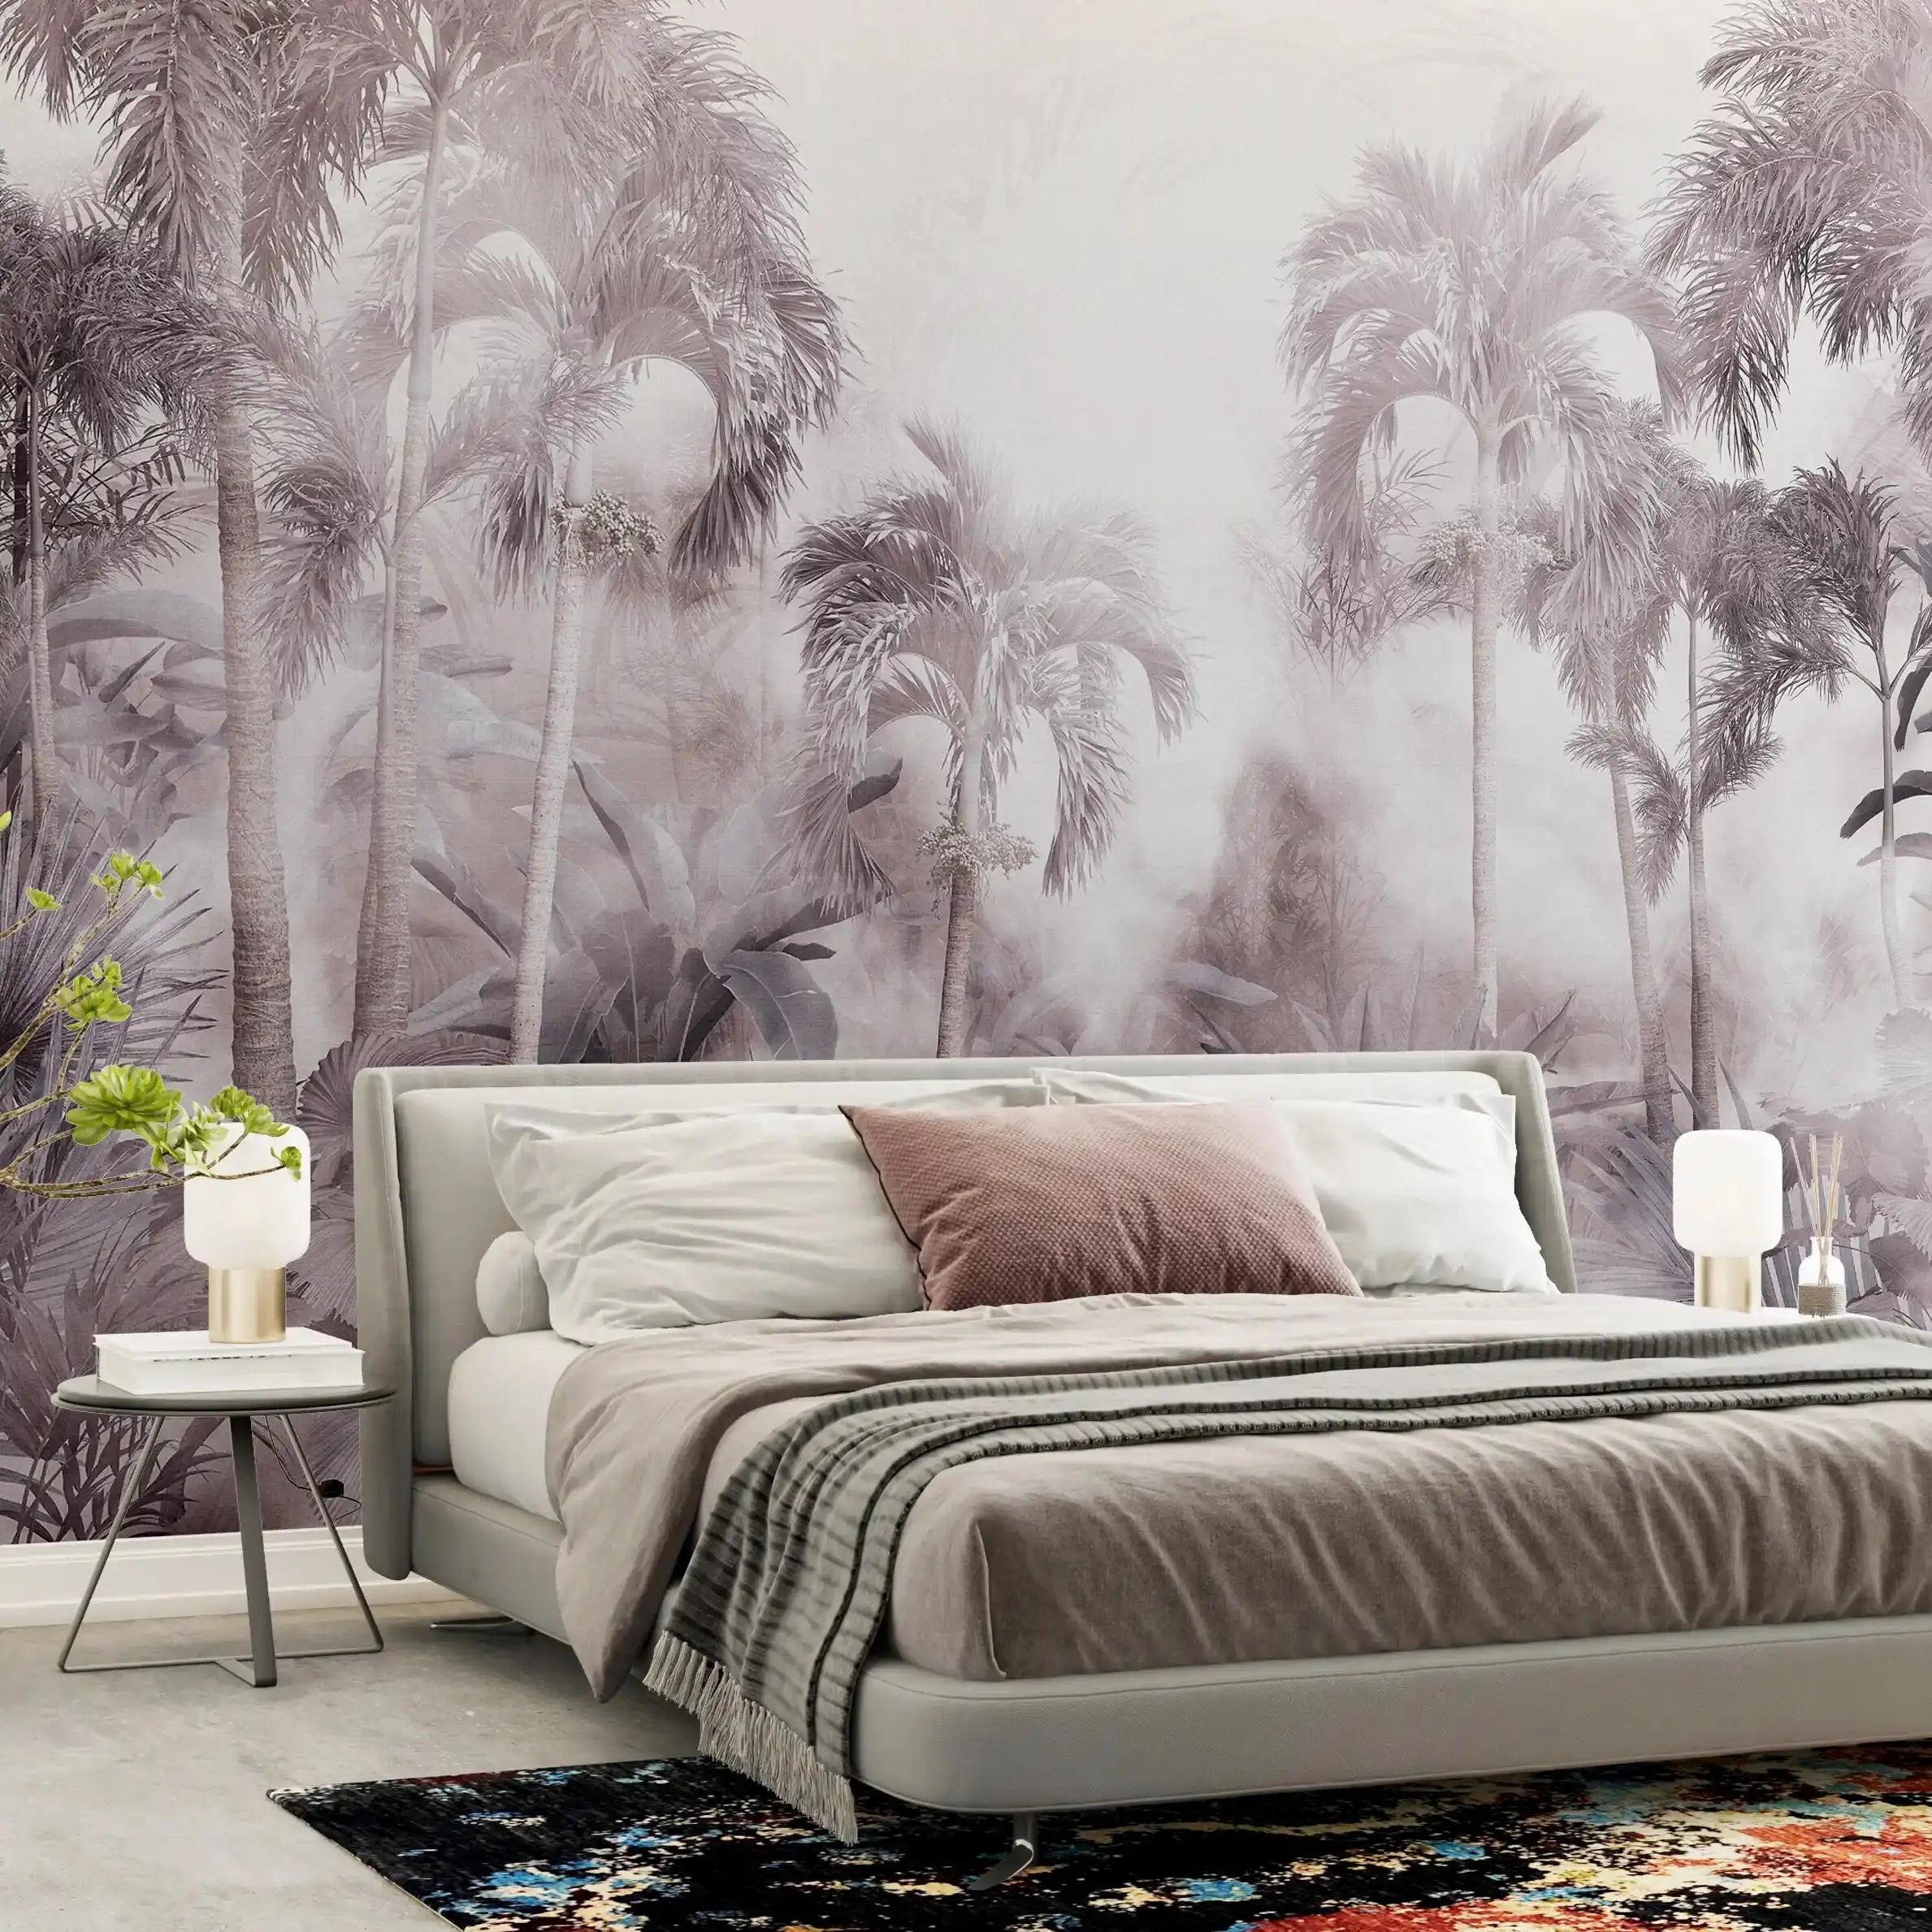 3029-C / Temporary Wallpaper: Tropical Jungle in Foggy Watercolor, Peel and Stick for Renters and DIY Deco - Artevella